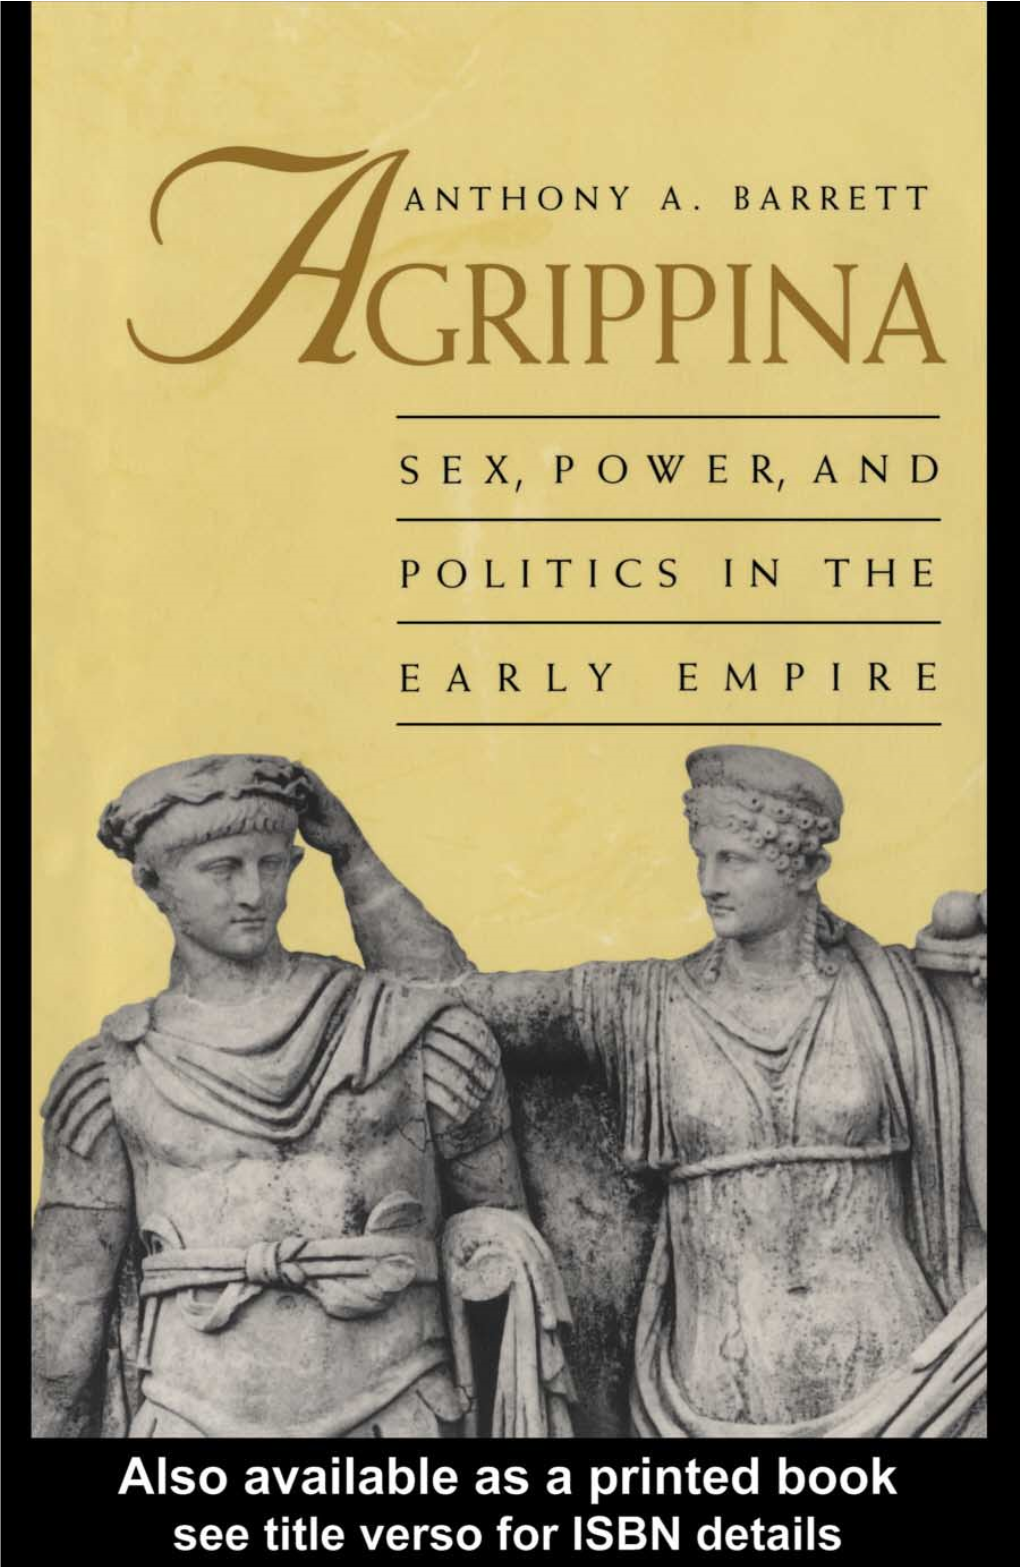 Agrippina: Sex, Power, and Politics in the Early Empire by Yale University Press